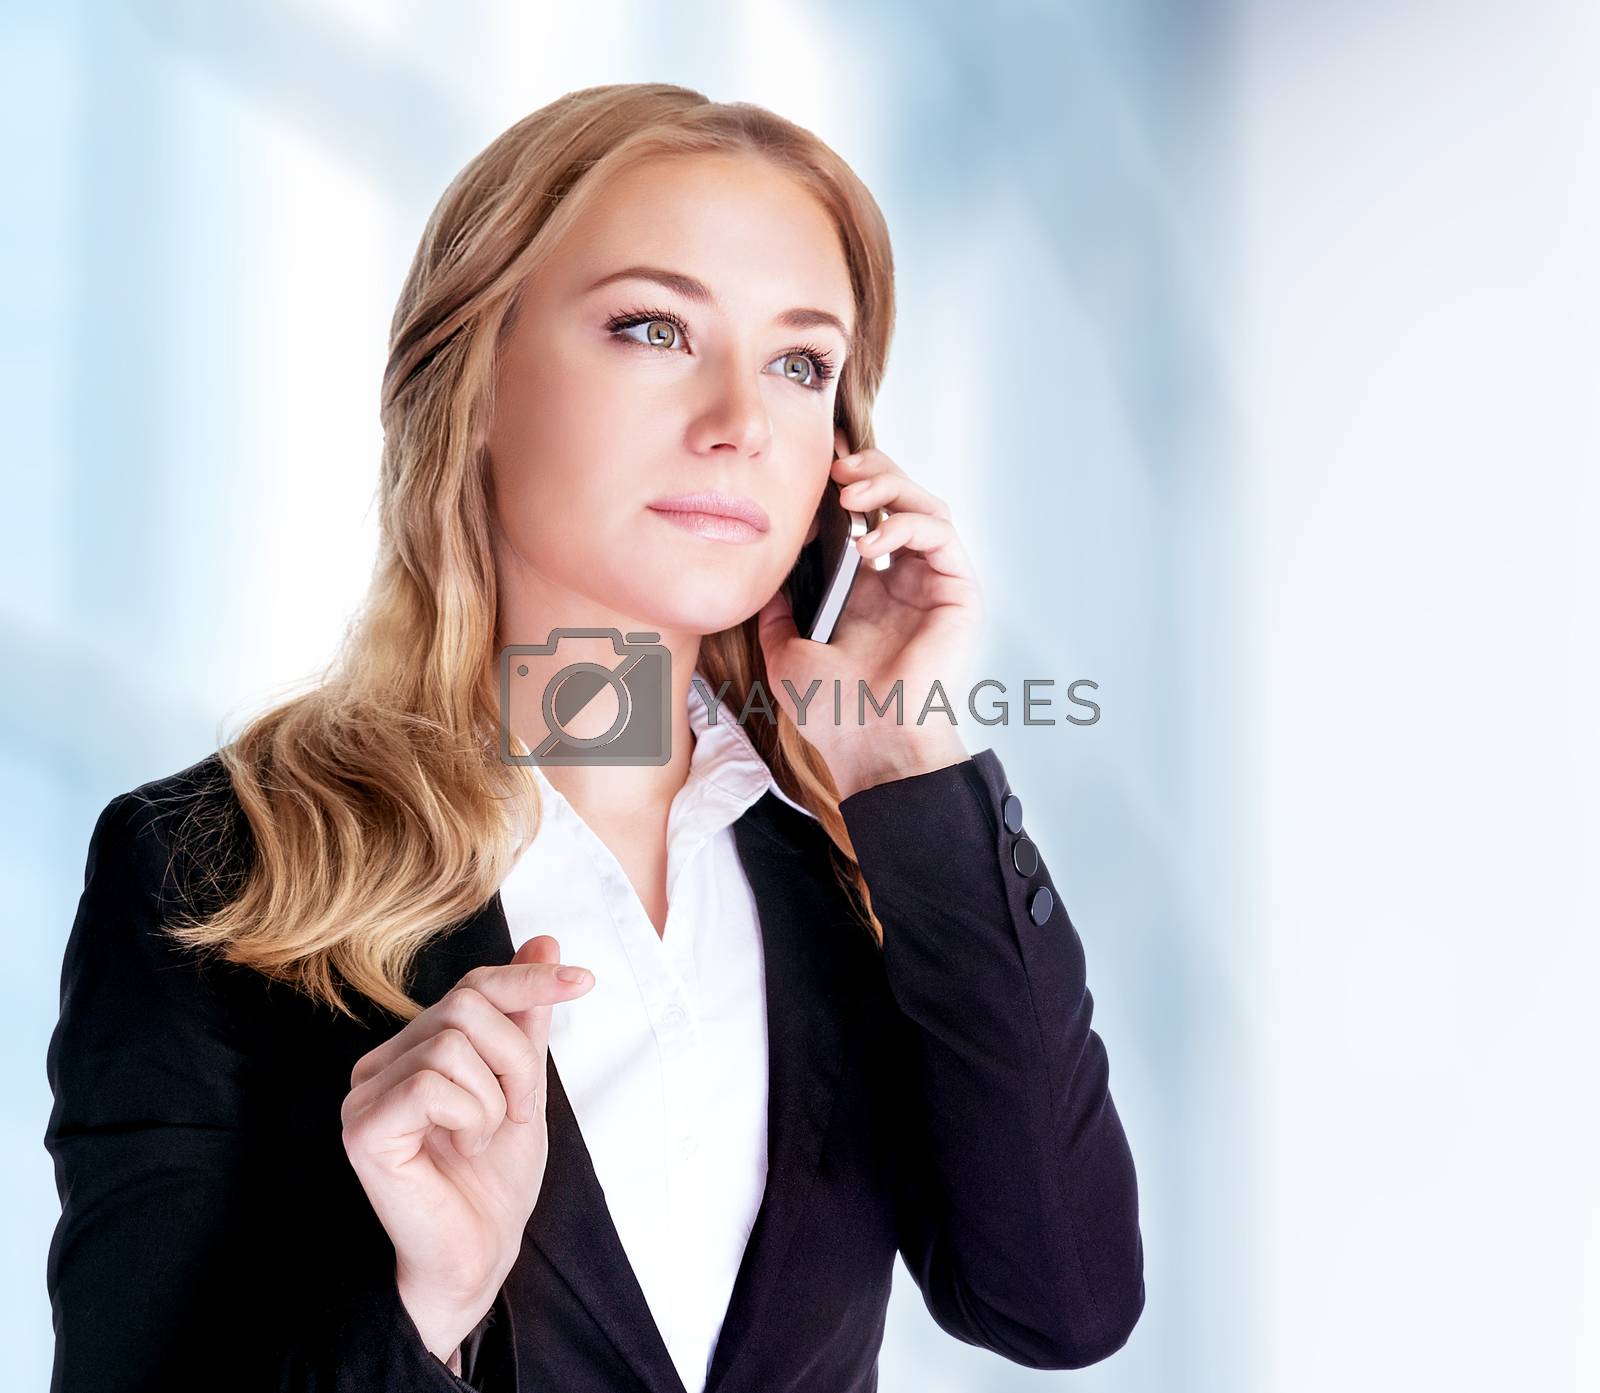 Royalty free image of Business woman talking on phone by Anna_Omelchenko